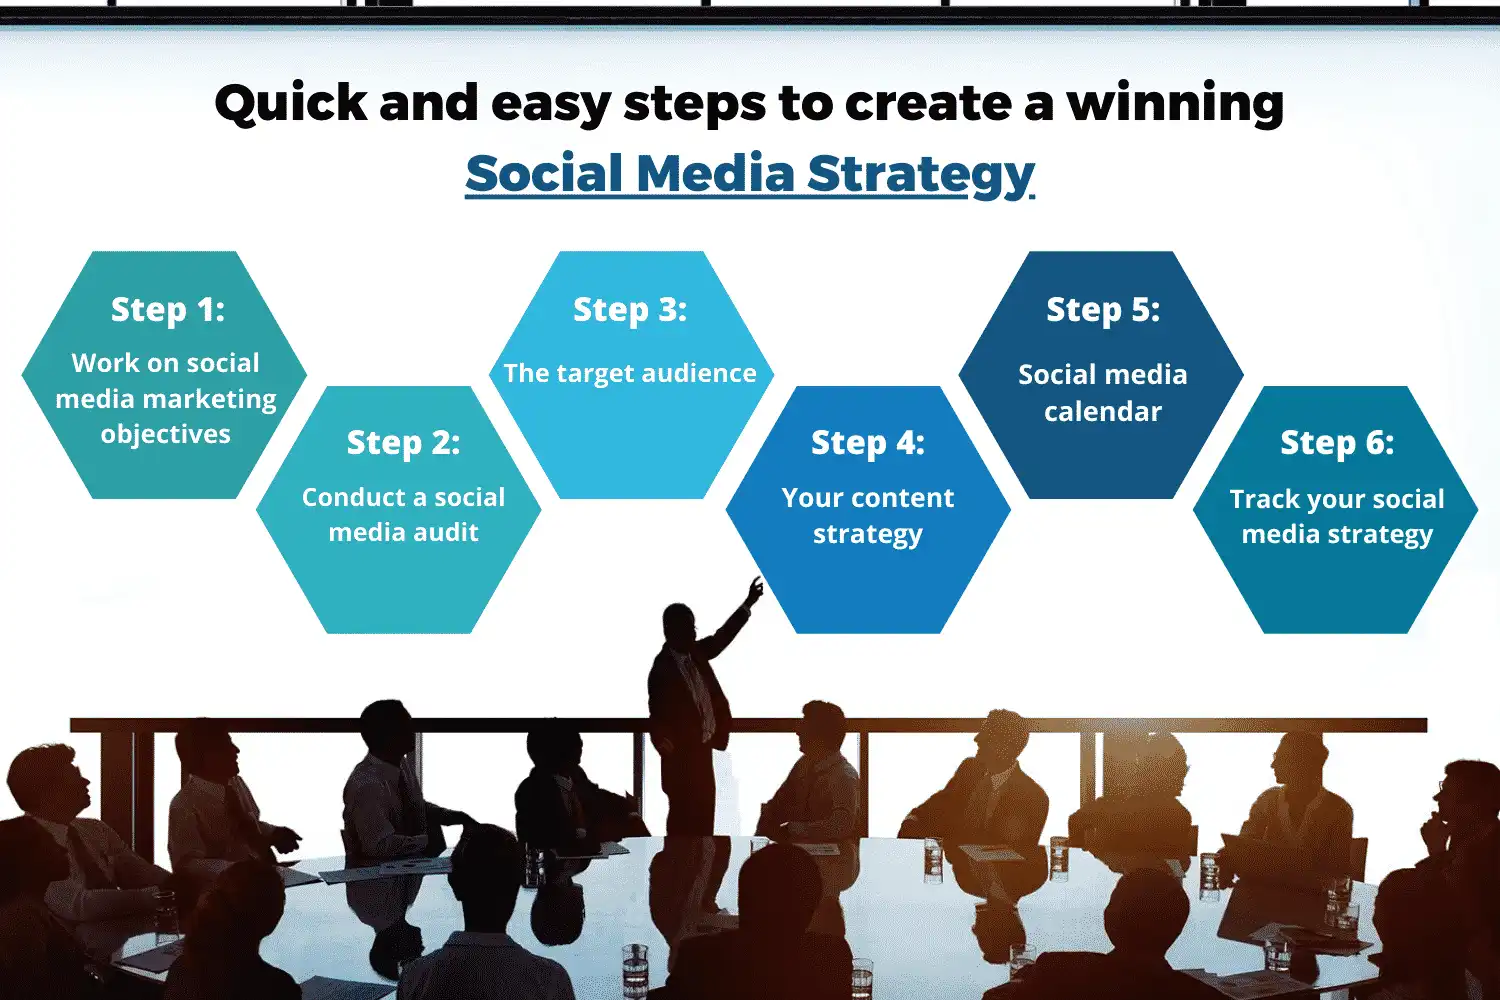 10-Step for Social Media Strategy Success for your business